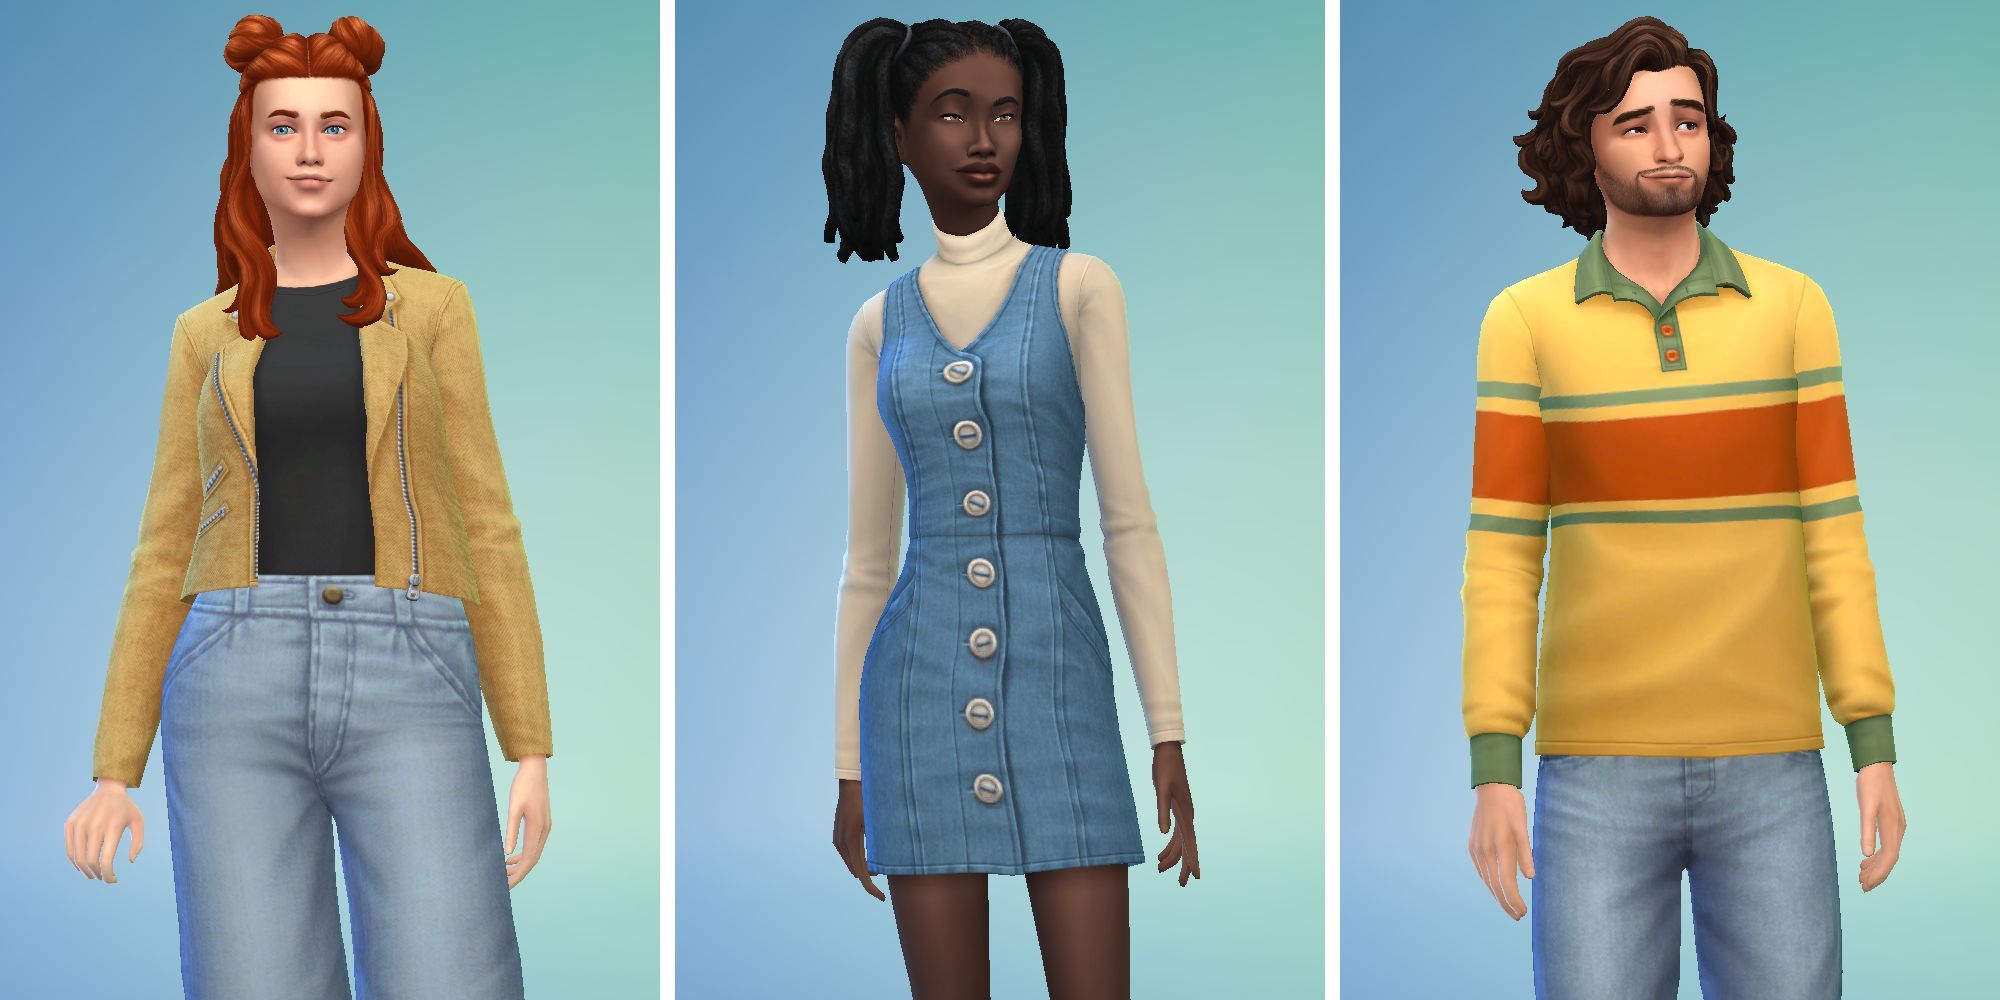 Three images of Sims in Sims 4 Create A Sim. One in a tan jacket, one in denim dress, and a third in a yellow polo shirt